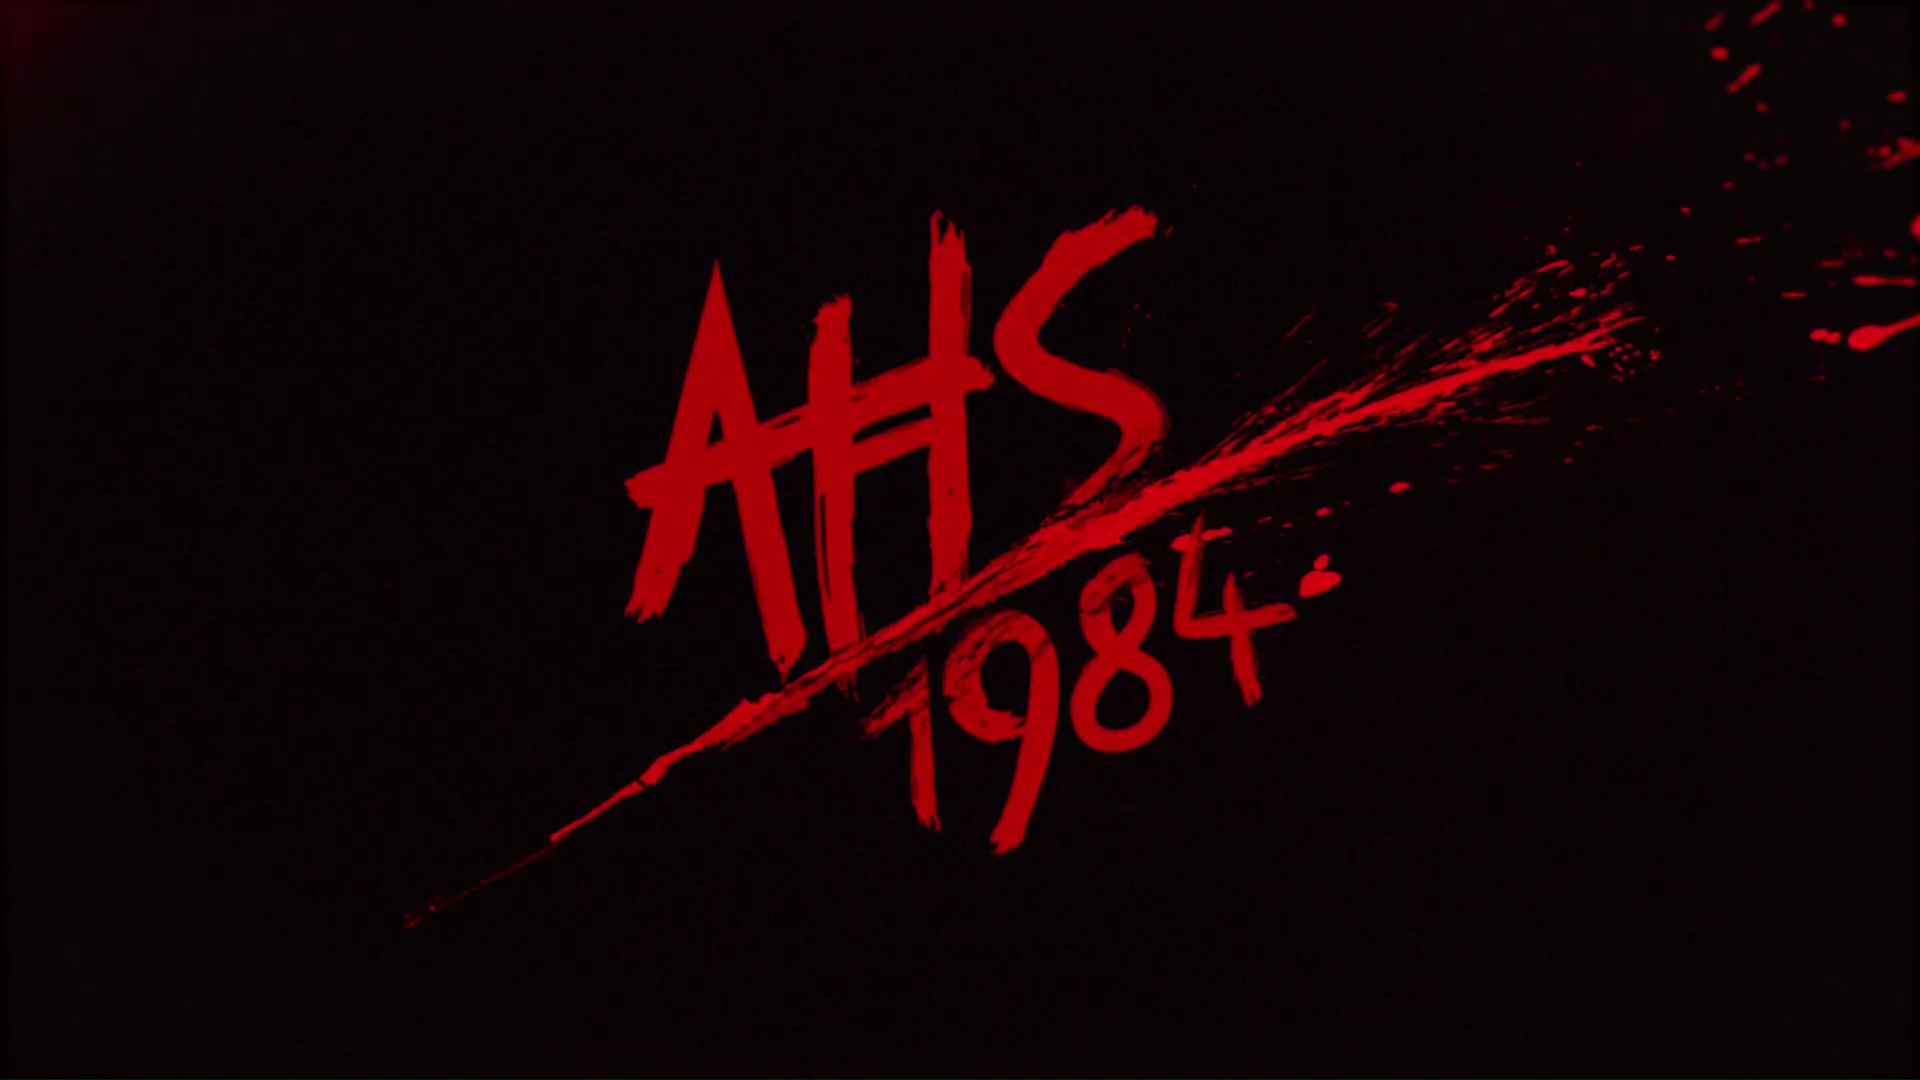 Pick Your Bunk in New American Horror Story: 1984 Teaser